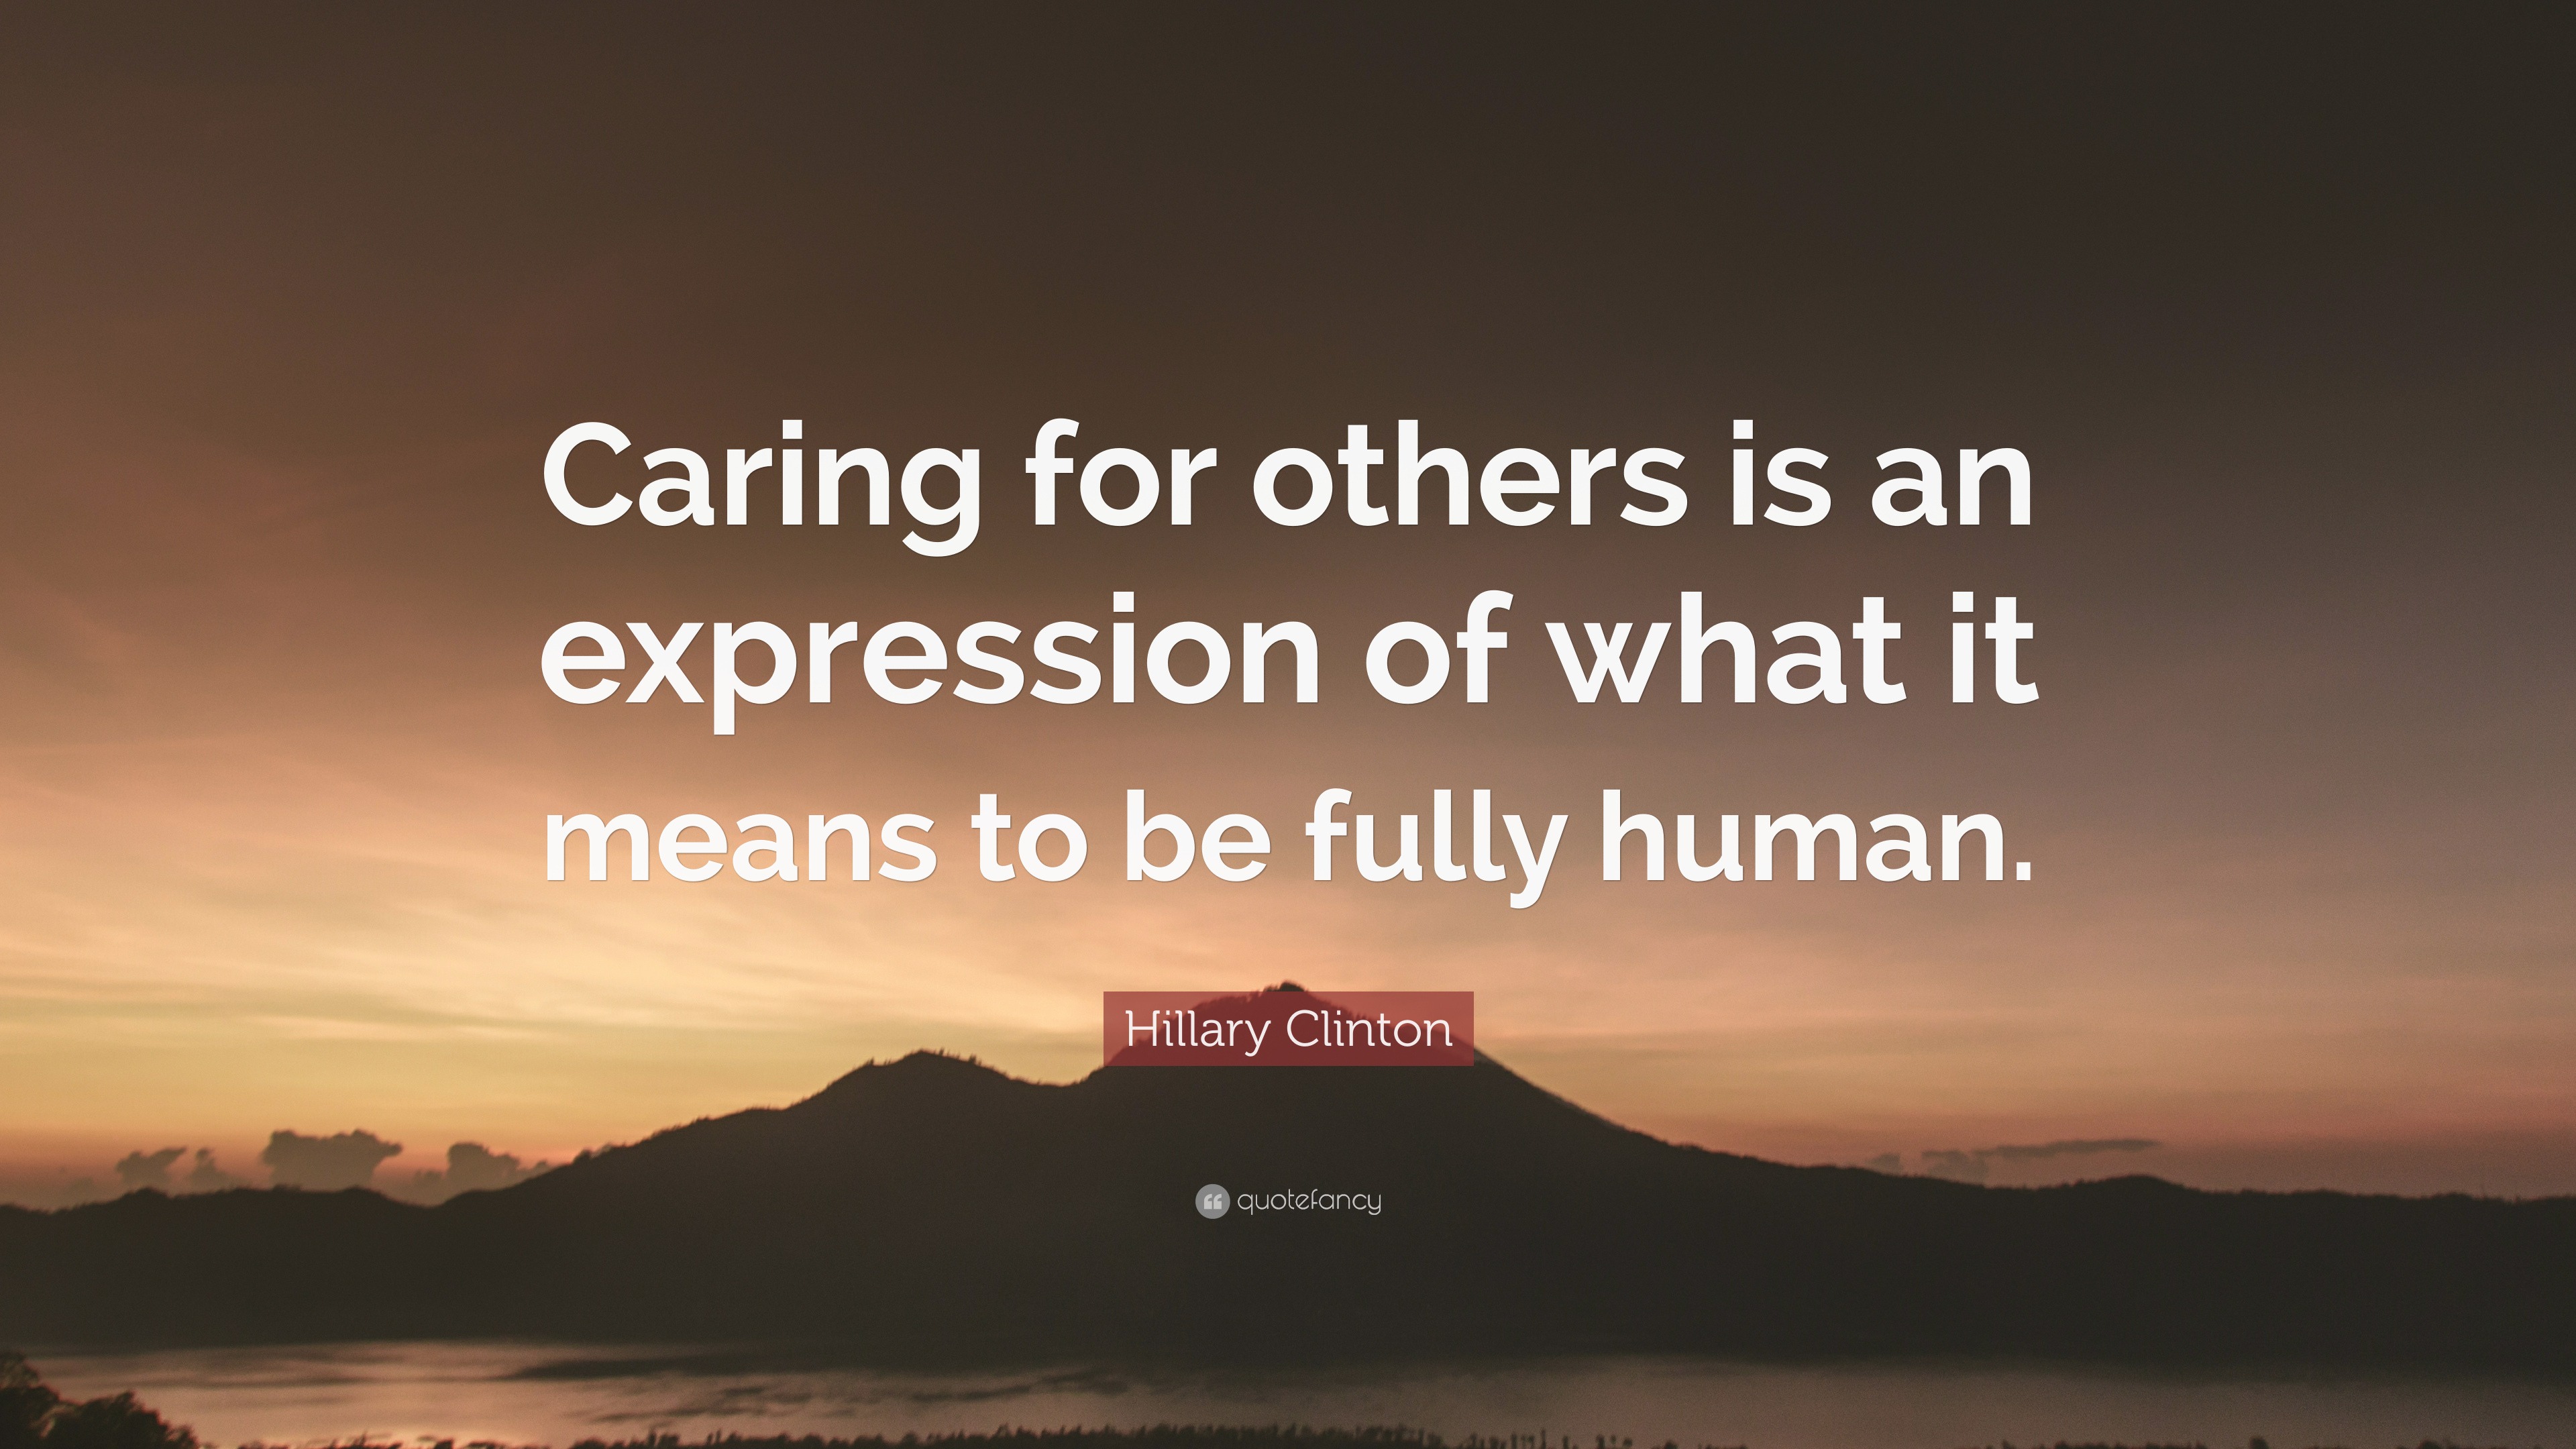 Hillary Clinton Quote “caring For Others Is An Expression Of What It Means To Be Fully Human”